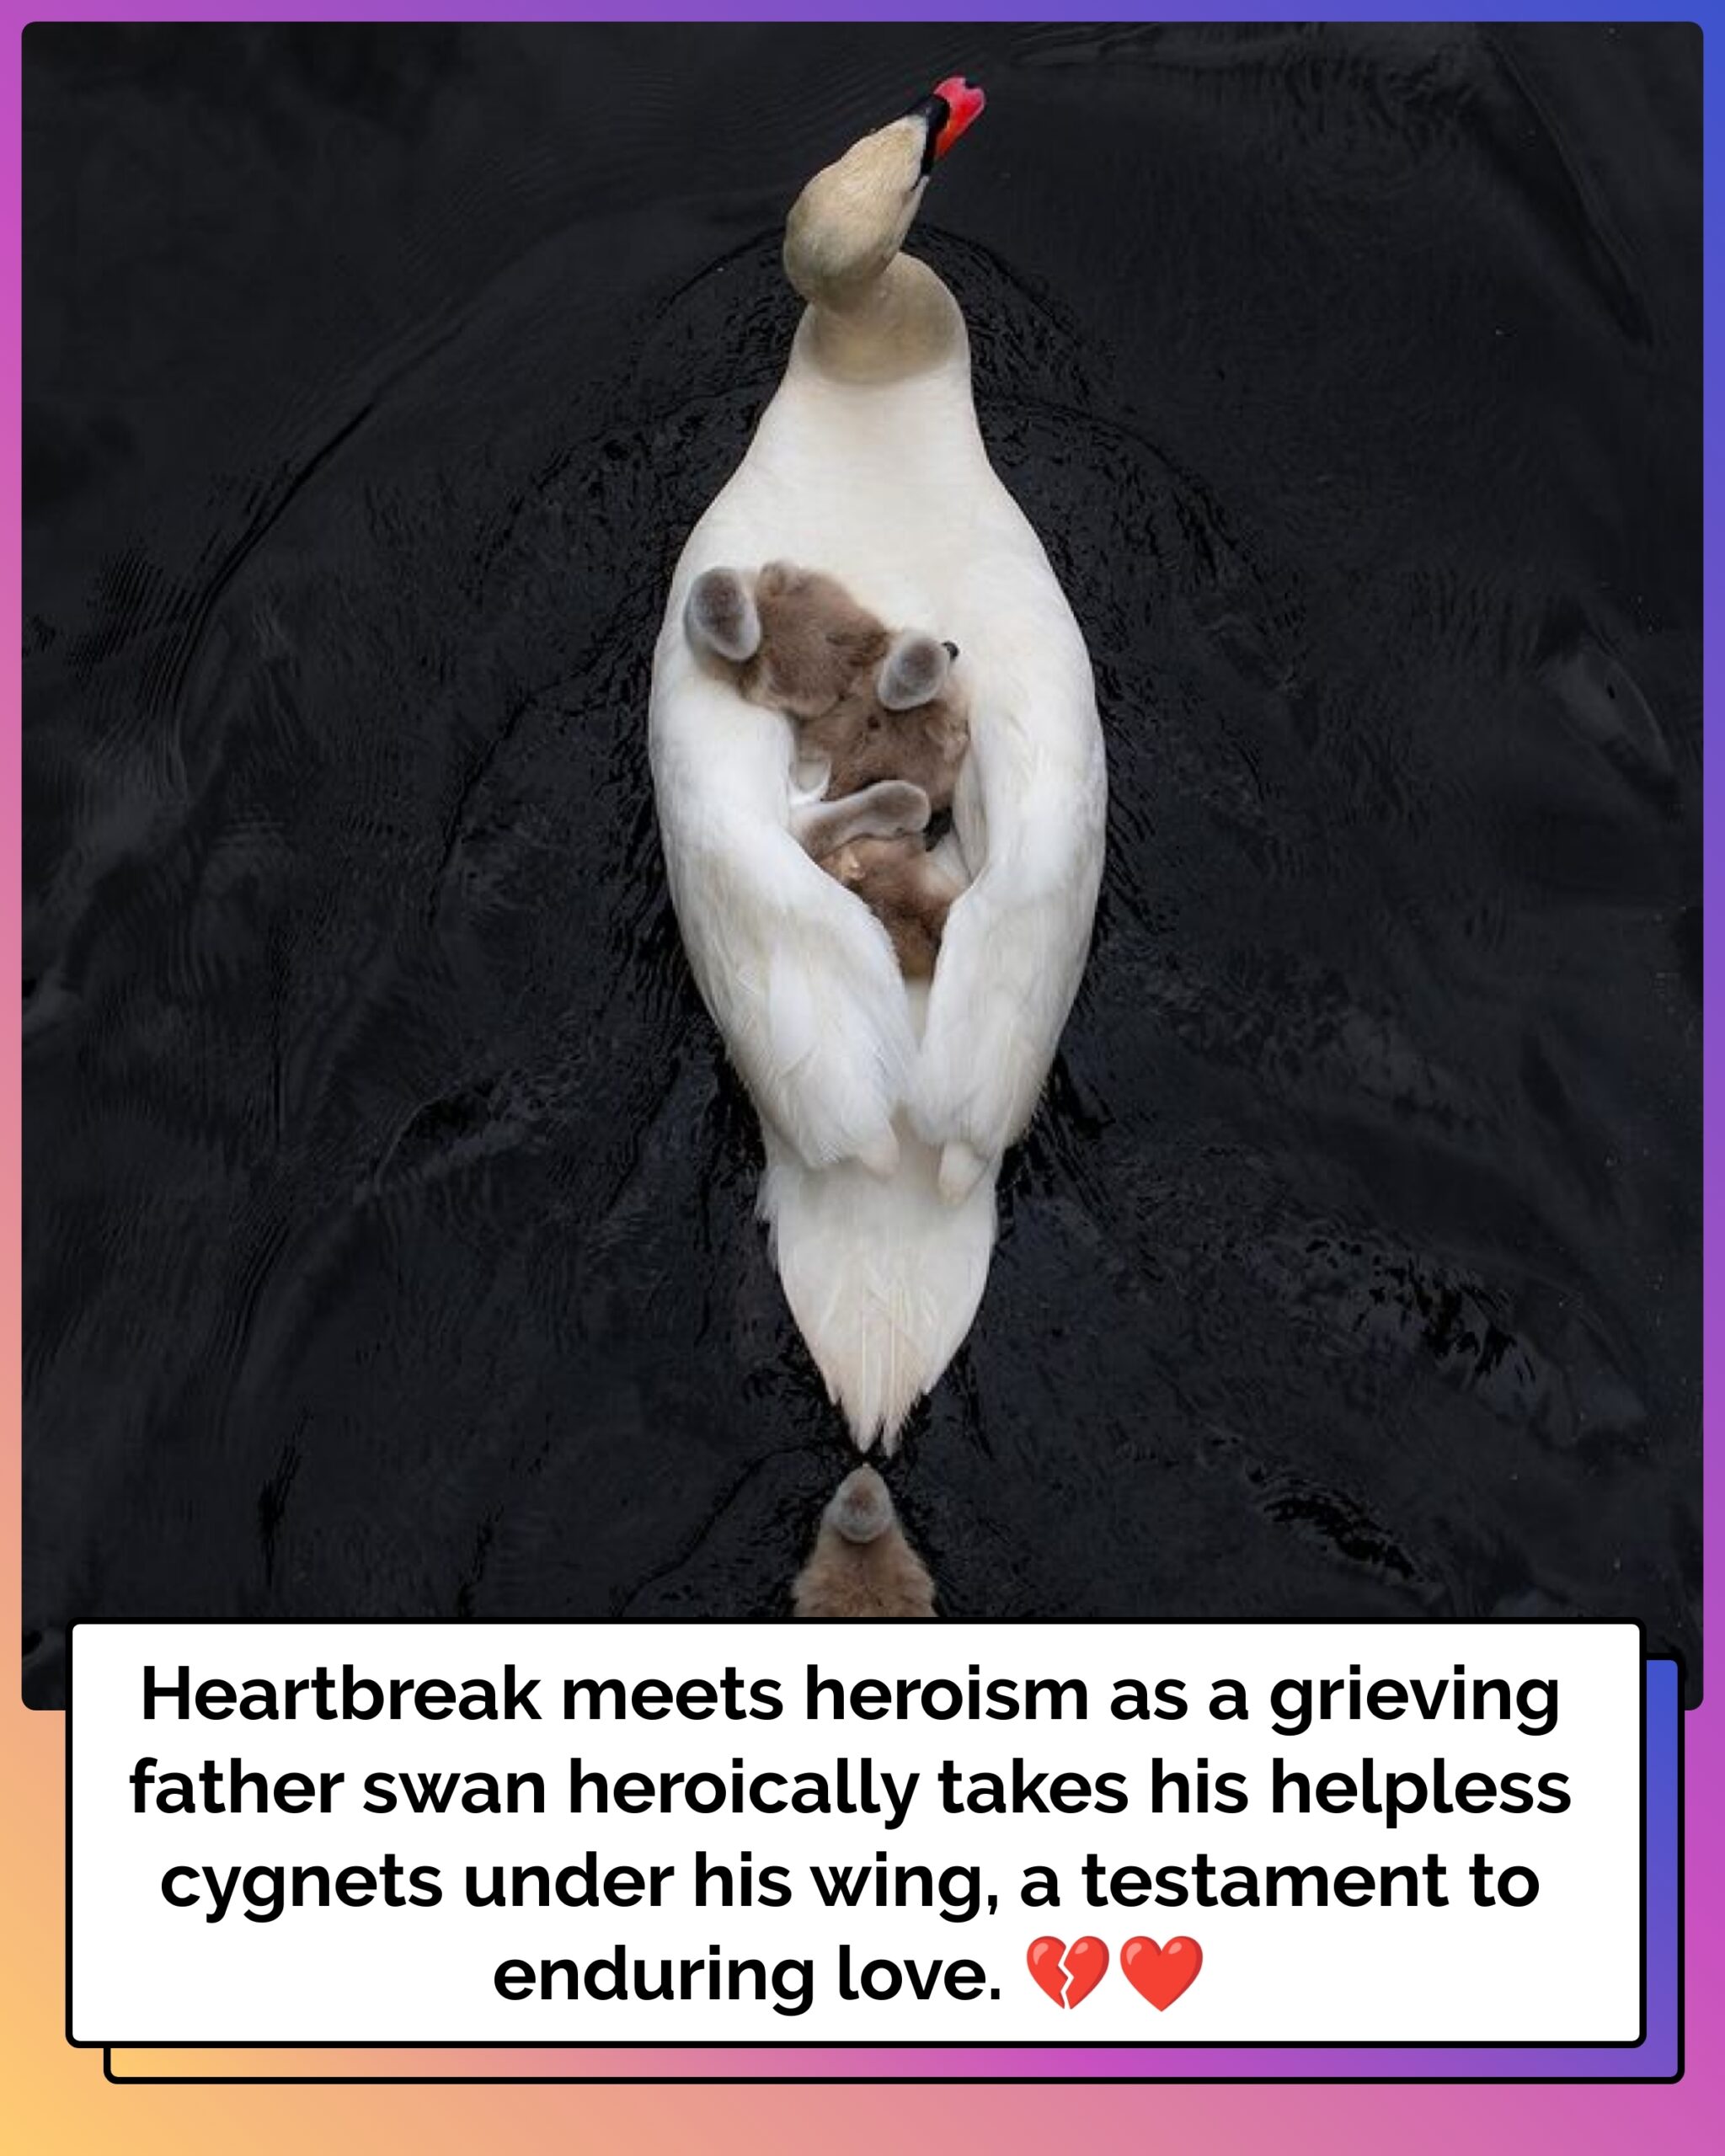 Male swan takes babies under his wing after the death of their mother